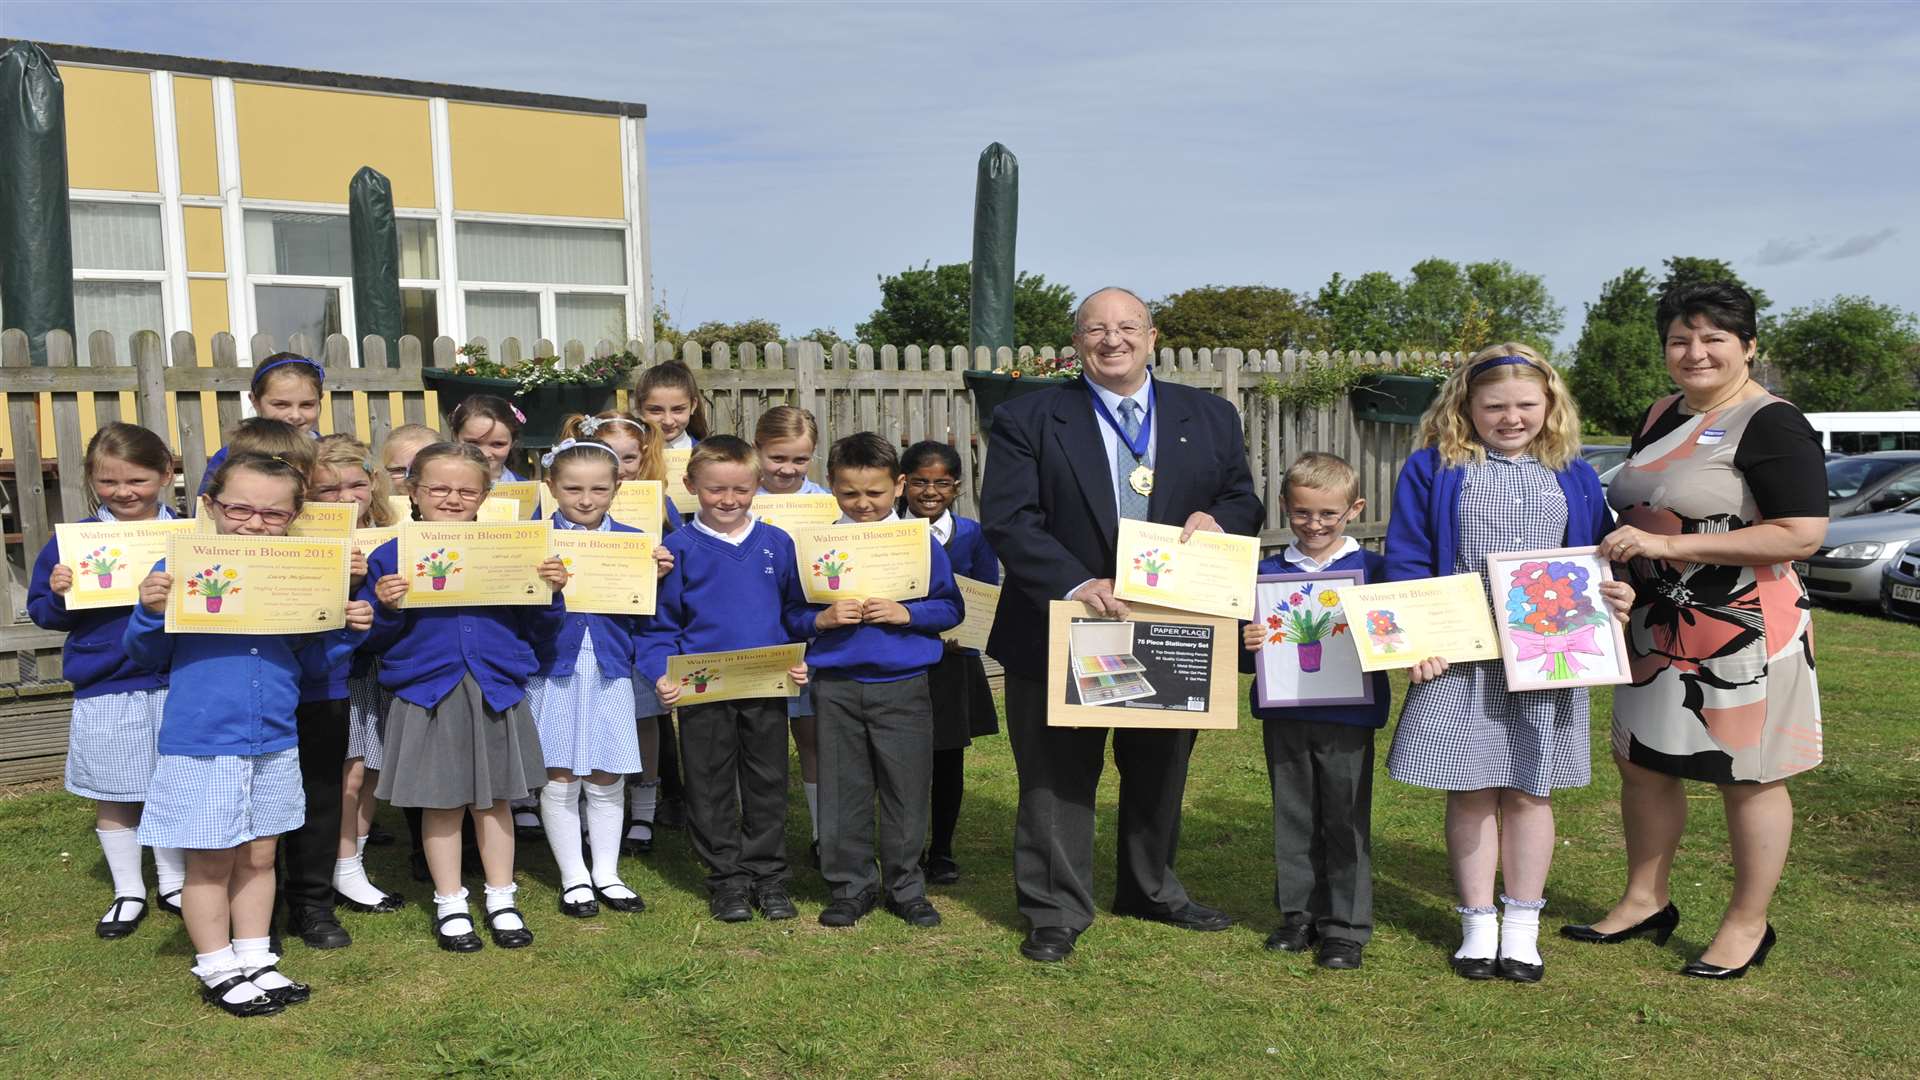 Runners up and winners at The Downs school with Cllr Pat Heath and Cllr Sue LeChevalier